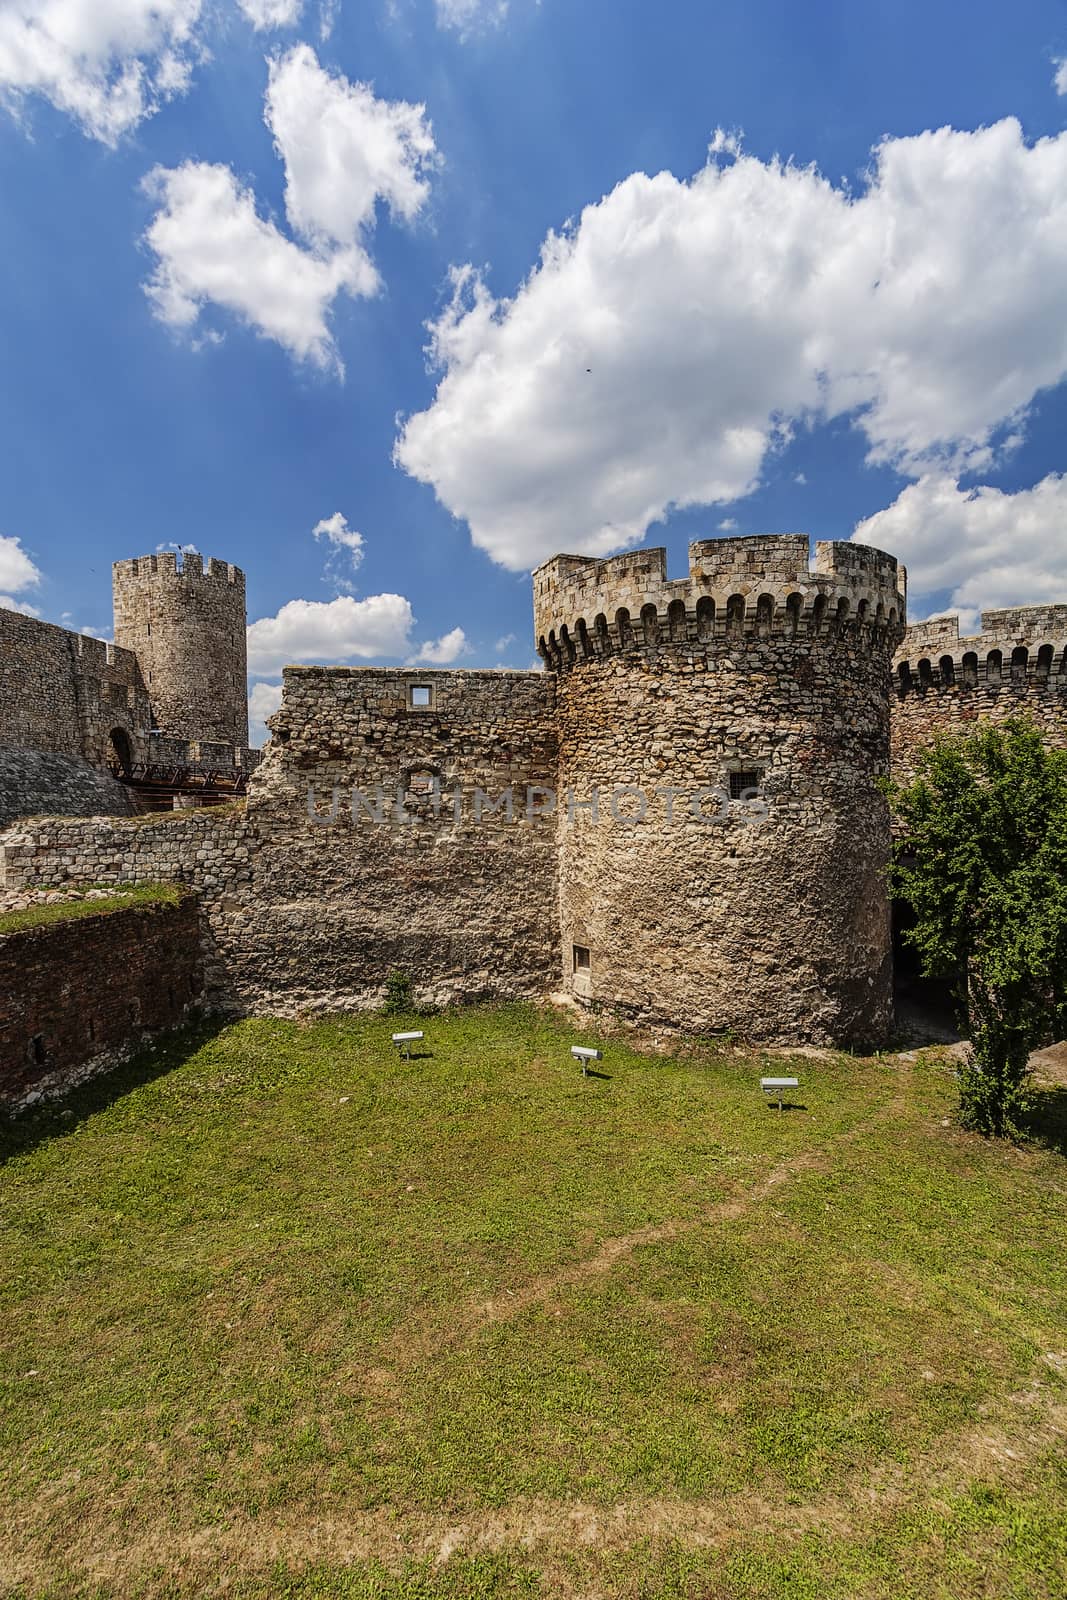 Belgrade old fortress wall surrounded by nature in day time